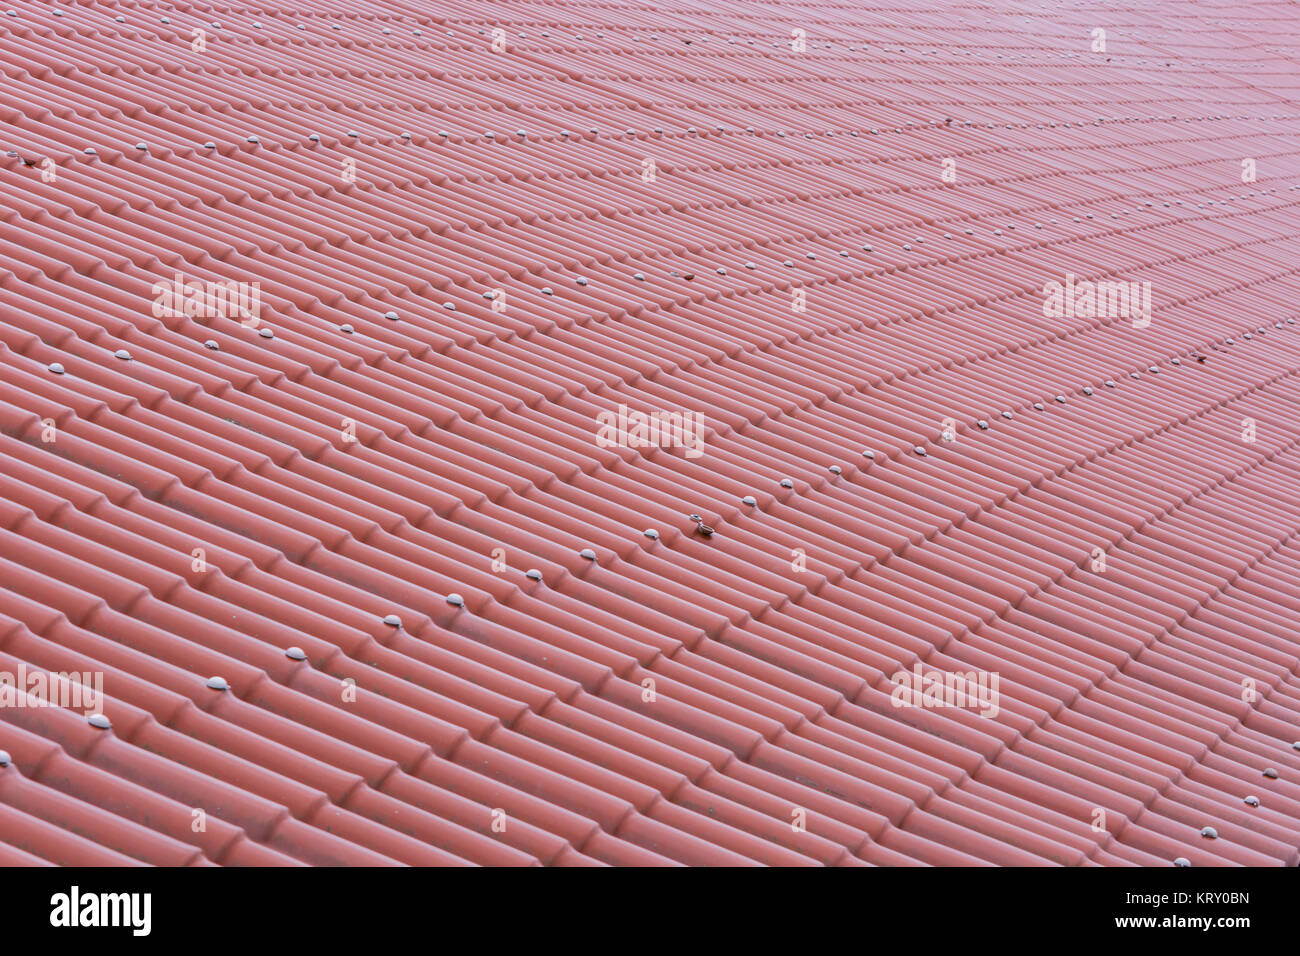 seamless tile panels in terracotafarbe Stock Photo